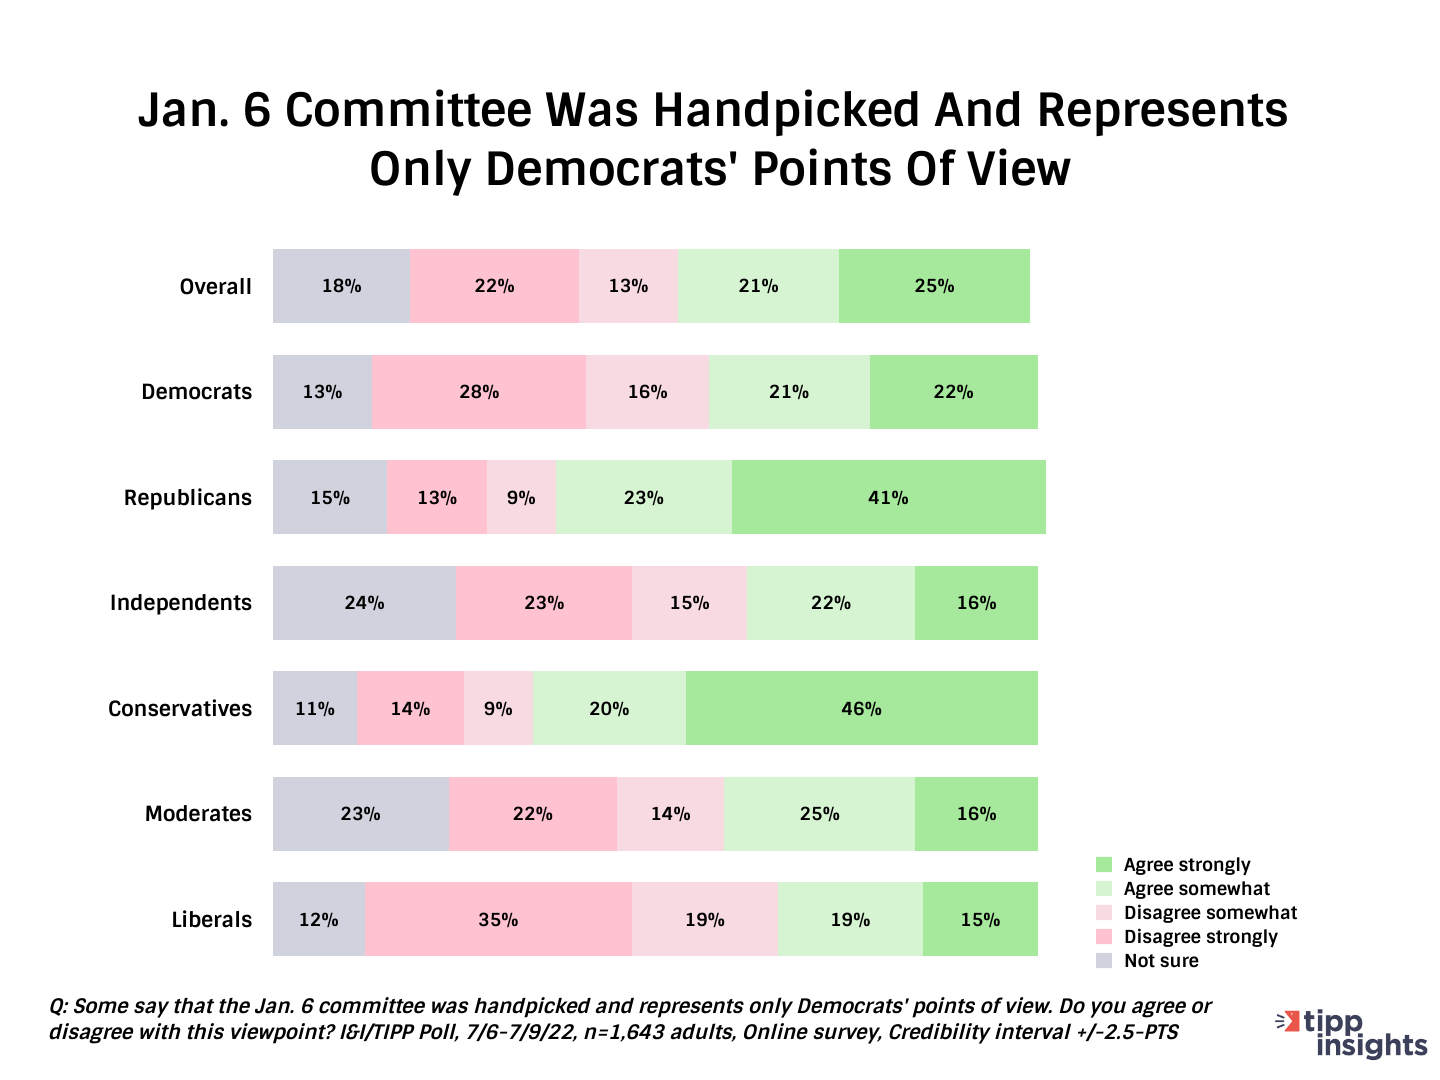 I&I/TIPP Poll Results: Do Americans believe the January 6th committe was handpicked and only represents democrats